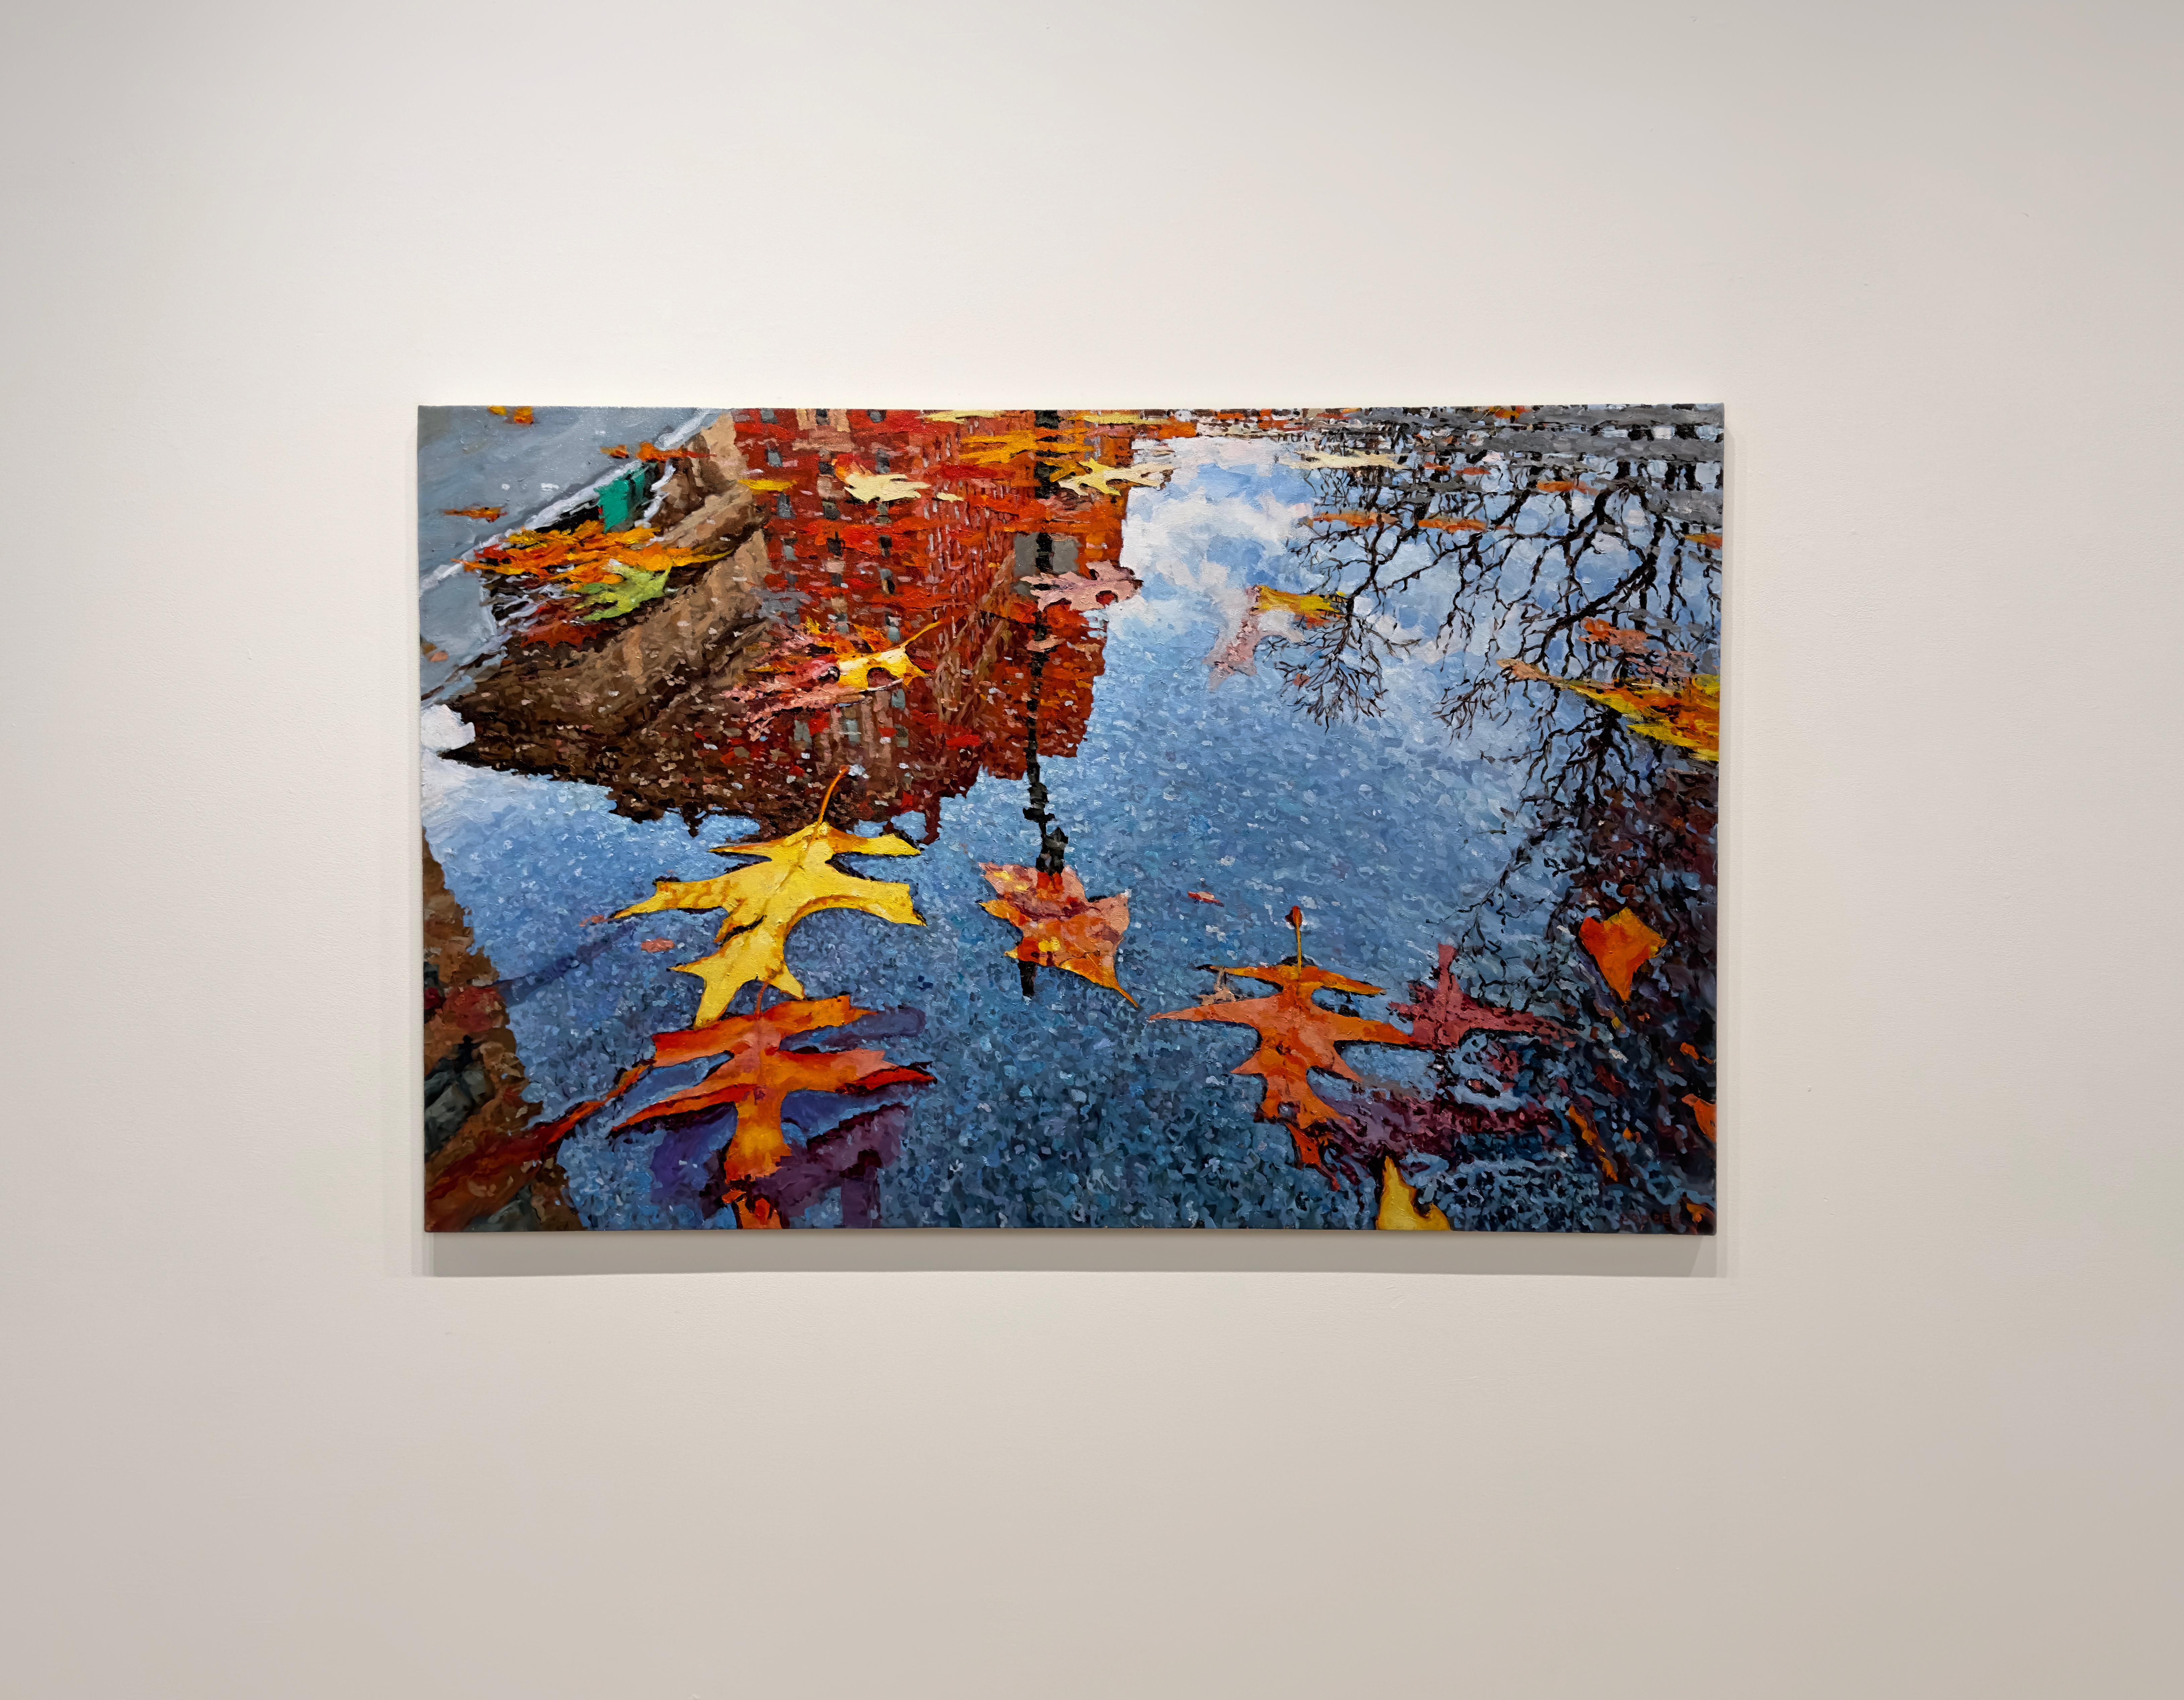 FALL REFLECTION CENTRAL PARK - Realism / Cityscape / Autumn  - Painting by Richard Combes